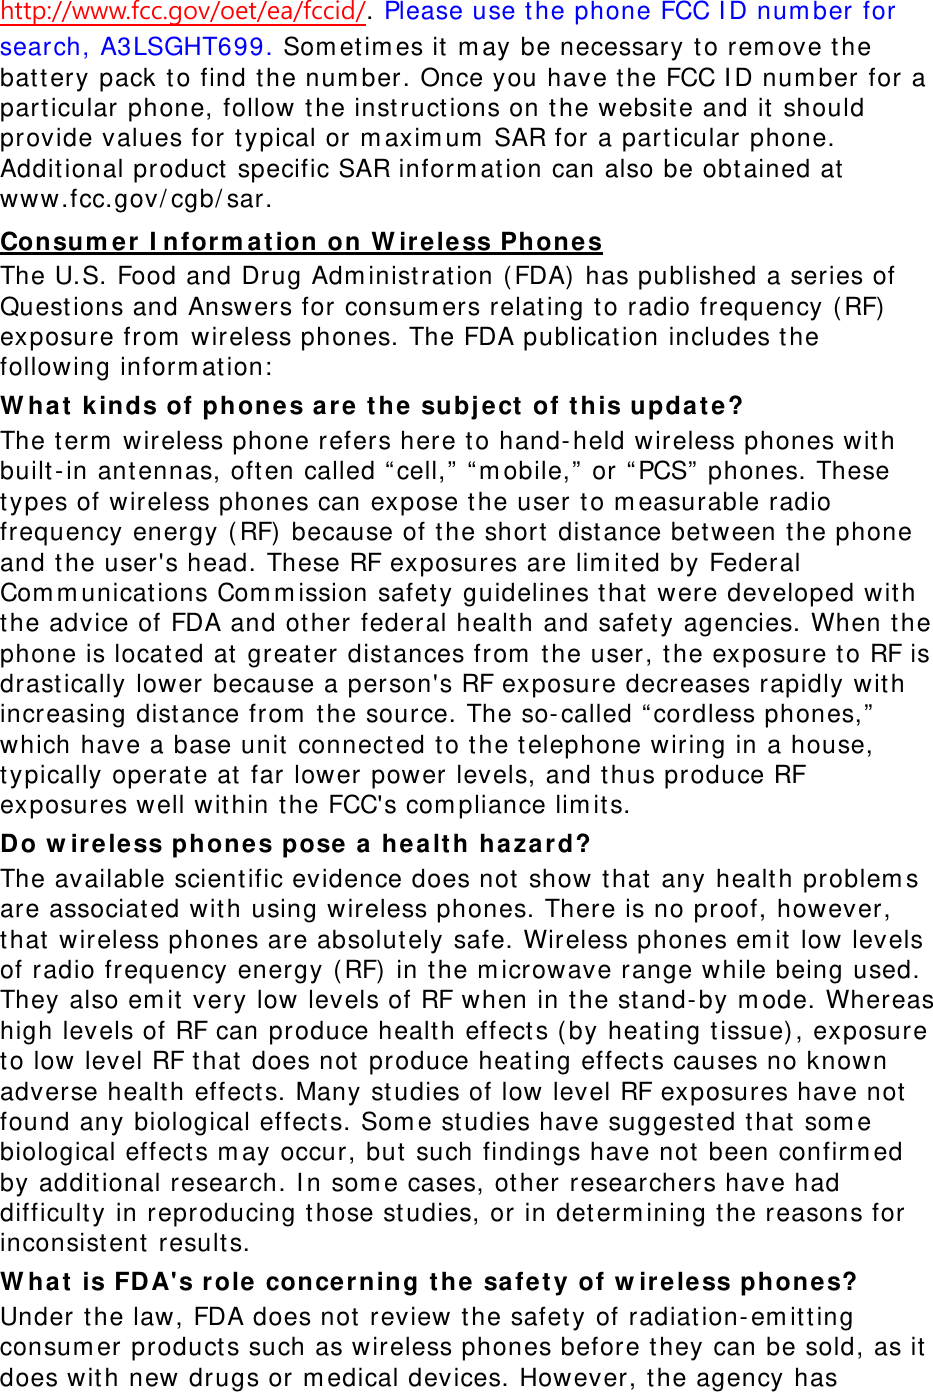 http://www.fcc.gov/oet/ea/fccid/. Please use the phone FCC I D num ber for search, A3LSGHT699. Som etim es it  m ay be necessary t o rem ove the batt ery pack to find the num ber. Once you have t he FCC I D num ber for a part icular phone, follow t he inst ruct ions on the websit e and it  should provide values for t ypical or m axim um  SAR for a part icular phone. Additional product specific SAR inform ation can also be obtained at www.fcc.gov/ cgb/ sar. Consum er I nform at ion on W ireless Phone s The U.S. Food and Drug Adm inist ration ( FDA)  has published a series of Quest ions and Answers for consum ers relating t o radio frequency ( RF)  exposure from  wireless phones. The FDA publication includes t he following inform at ion:  W hat  kinds of phones a re t he  subj e ct  of t his upda t e ? The t erm  wireless phone refers here t o hand- held wireless phones with built-in antennas, often called “ cell,”  “ m obile,”  or “ PCS”  phones. These types of wireless phones can expose t he user to m easurable radio frequency energy ( RF)  because of t he short dist ance bet ween t he phone and t he user&apos;s head. These RF exposures are lim ited by Federal Com m unicat ions Com m ission safet y guidelines that were developed with the advice of FDA and ot her federal healt h and safet y agencies. When t he phone is located at greater dist ances from  t he user, the exposure t o RF is drast ically lower because a person&apos;s RF exposure decreases rapidly with increasing distance from  t he source. The so- called “ cordless phones,”  which have a base unit connected to the telephone wiring in a house, typically operate at  far lower power levels, and t hus produce RF exposures well wit hin t he FCC&apos;s com pliance lim its. Do w ire less phone s pose  a  he alt h haza rd? The available scient ific evidence does not  show t hat any health problem s are associat ed with using wireless phones. There is no proof, however, that wireless phones are absolutely safe. Wireless phones em it low levels of radio frequency energy ( RF)  in t he m icrowave range while being used. They also em it very low levels of RF when in the stand- by m ode. Whereas high levels of RF can produce health effect s ( by heating t issue) , exposure to low level RF that does not produce heat ing effect s causes no known adverse health effect s. Many st udies of low level RF exposures have not  found any biological effect s. Som e studies have suggest ed t hat som e biological effect s m ay occur, but such findings have not been confirm ed by additional research. I n som e cases, other researchers have had difficulty in reproducing t hose studies, or in det erm ining t he reasons for inconsistent results. W hat  is FDA&apos;s r ole concerning the  sa fet y of w ire less phones? Under the law, FDA does not review the safet y of radiat ion- em itting consum er product s such as wireless phones before t hey can be sold, as it does wit h new drugs or m edical devices. However, t he agency has 